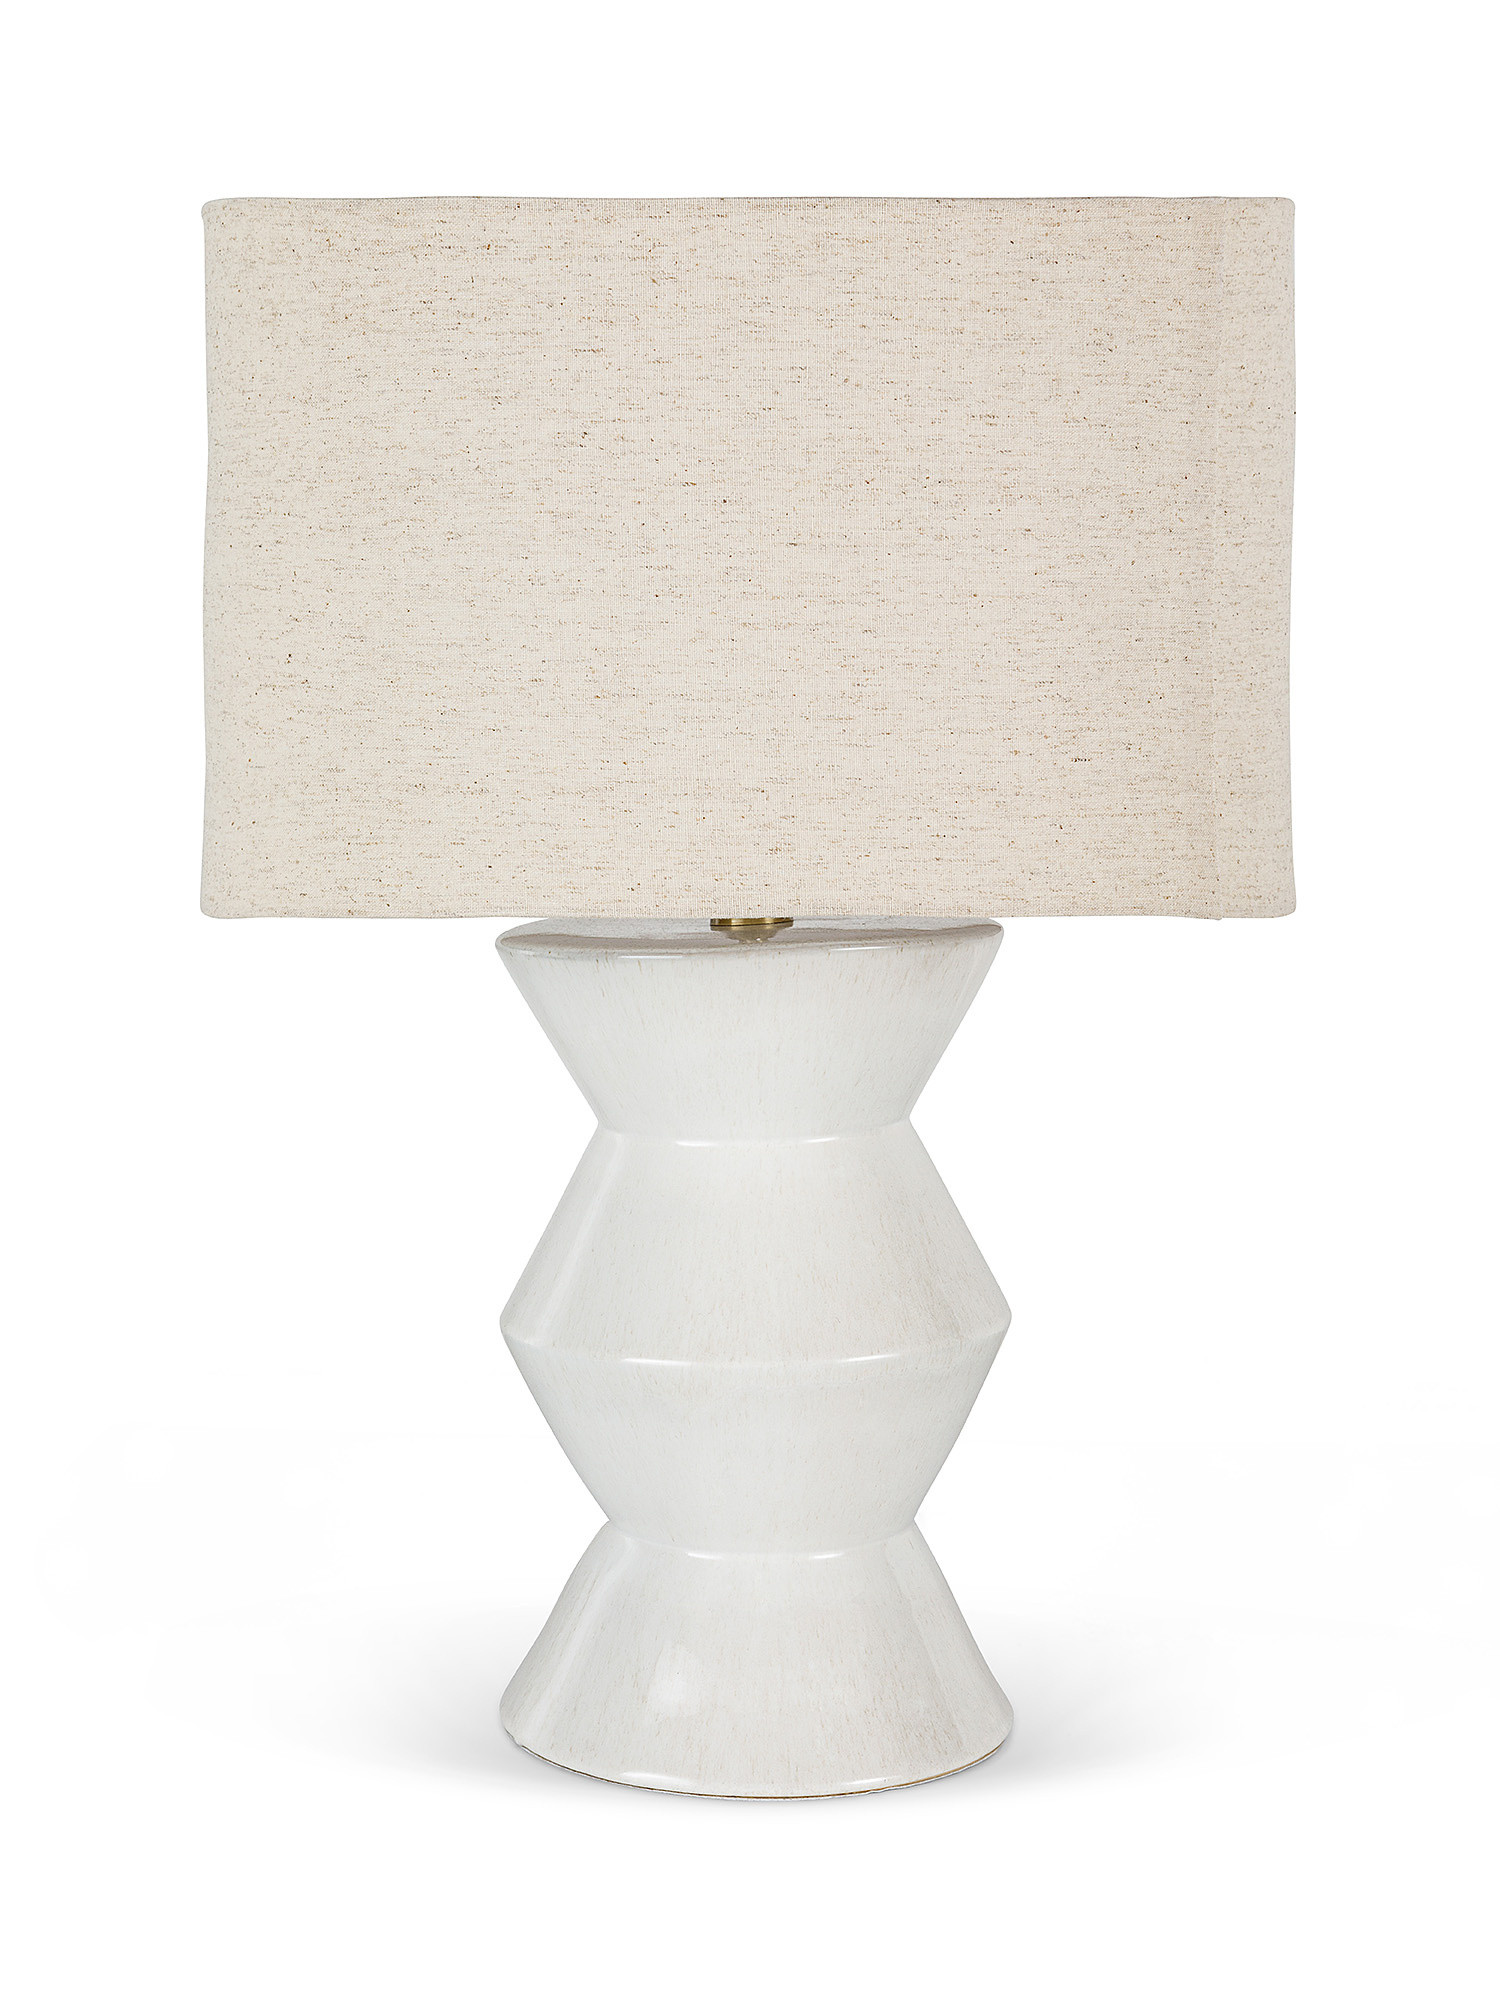 Firenze table lamp, White, large image number 0